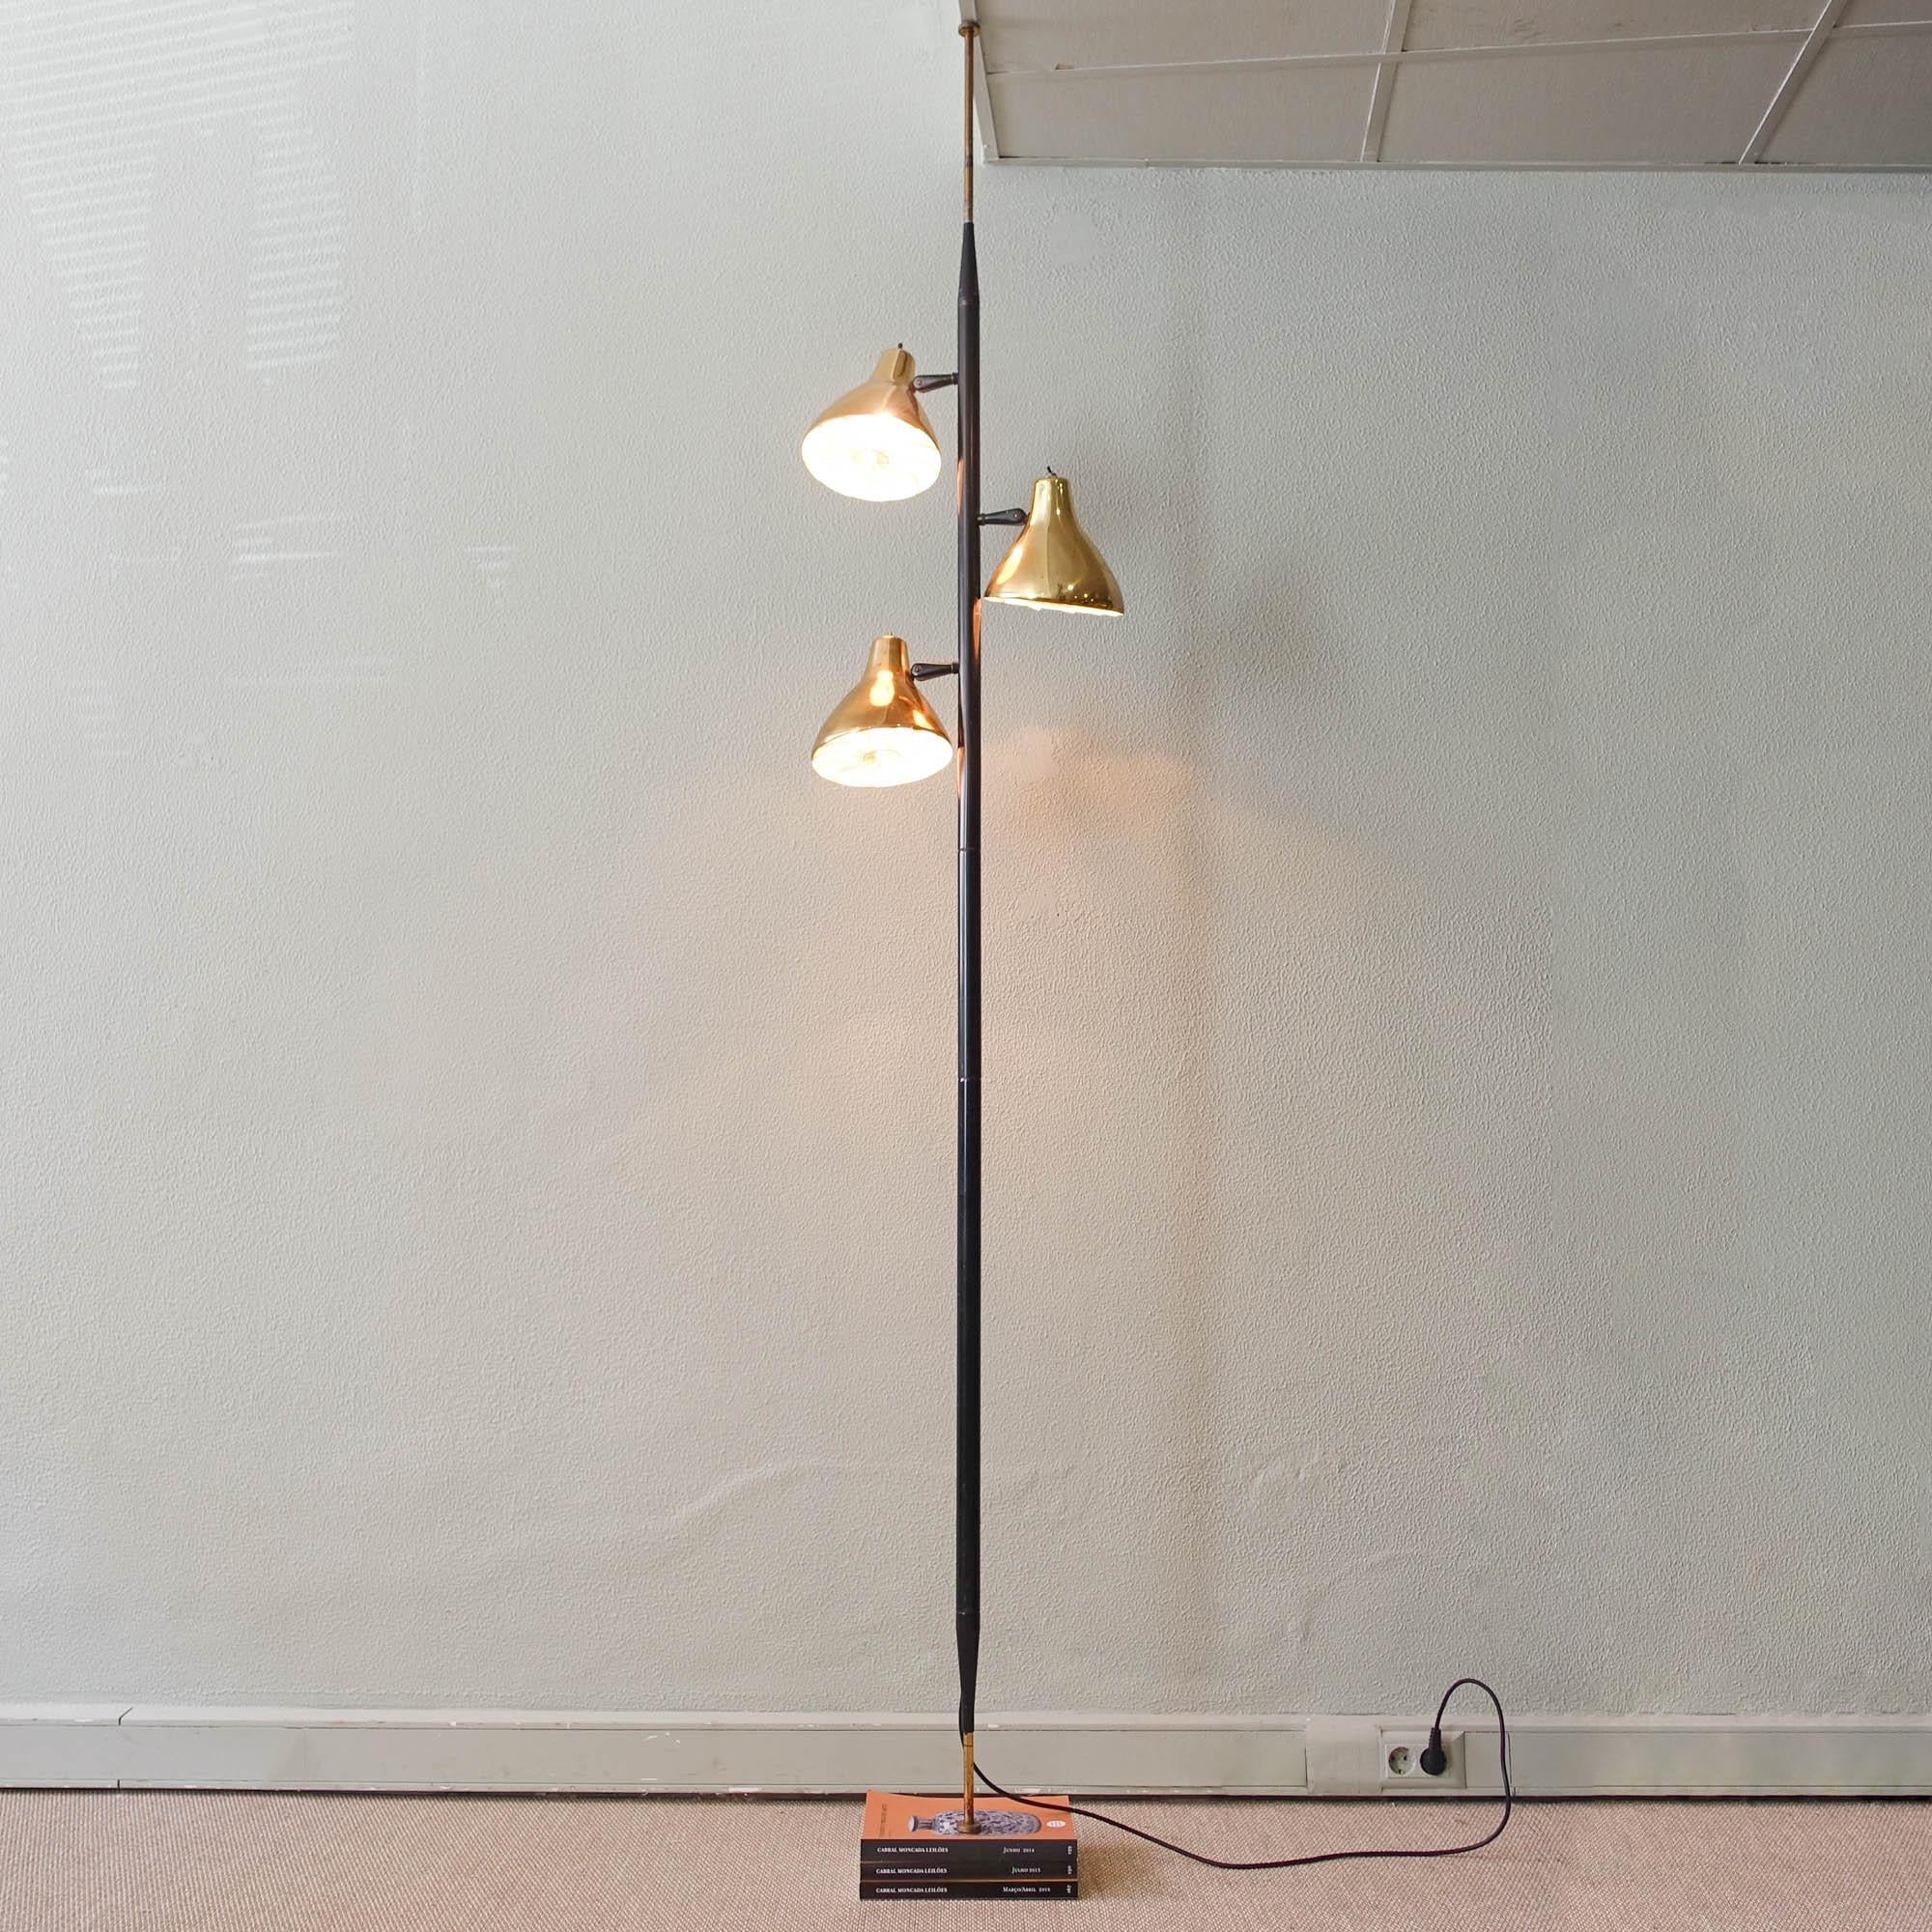 American Midcentury Adjustable Tension Floor Pole Lamp by Gerald Thurston for Lightolier